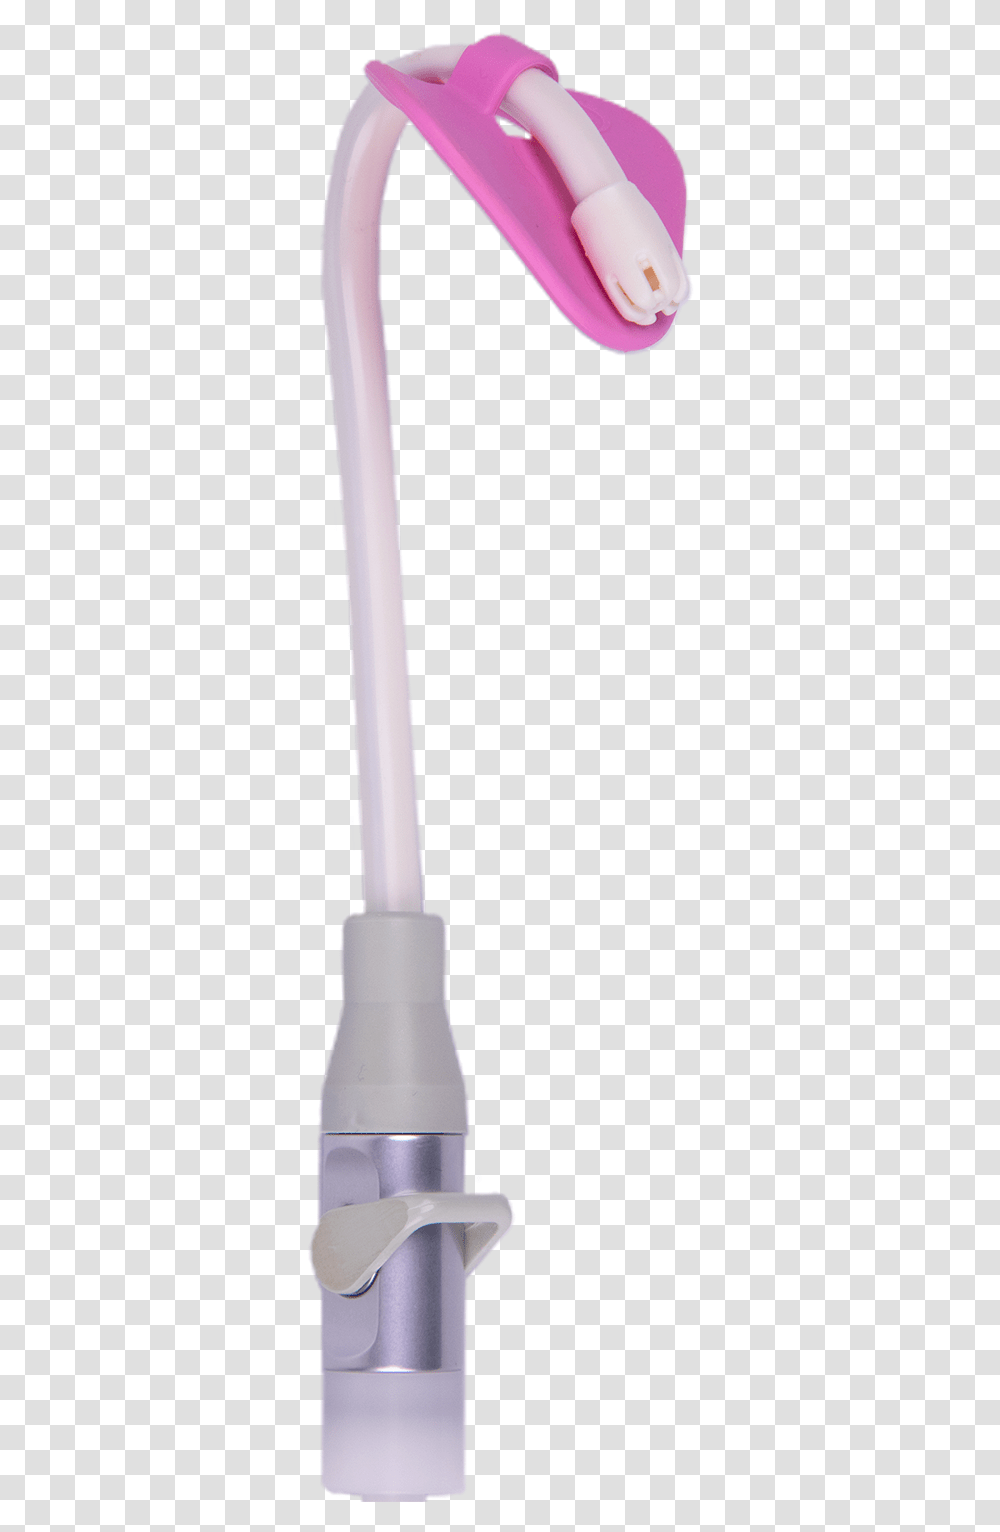 Brush, Tool, Toothbrush, Candle Transparent Png